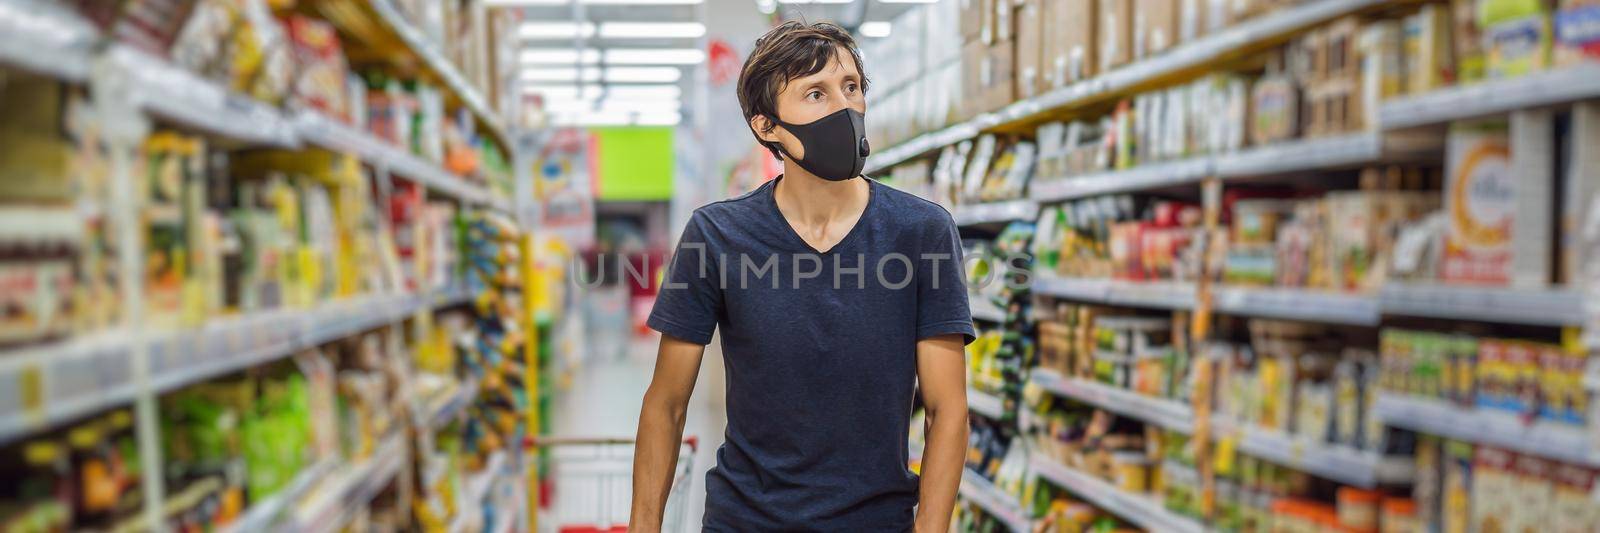 Alarmed man wears medical mask against coronavirus while grocery shopping in supermarket or store- health, safety and pandemic concept - young woman wearing protective mask and stockpiling food. BANNER, LONG FORMAT